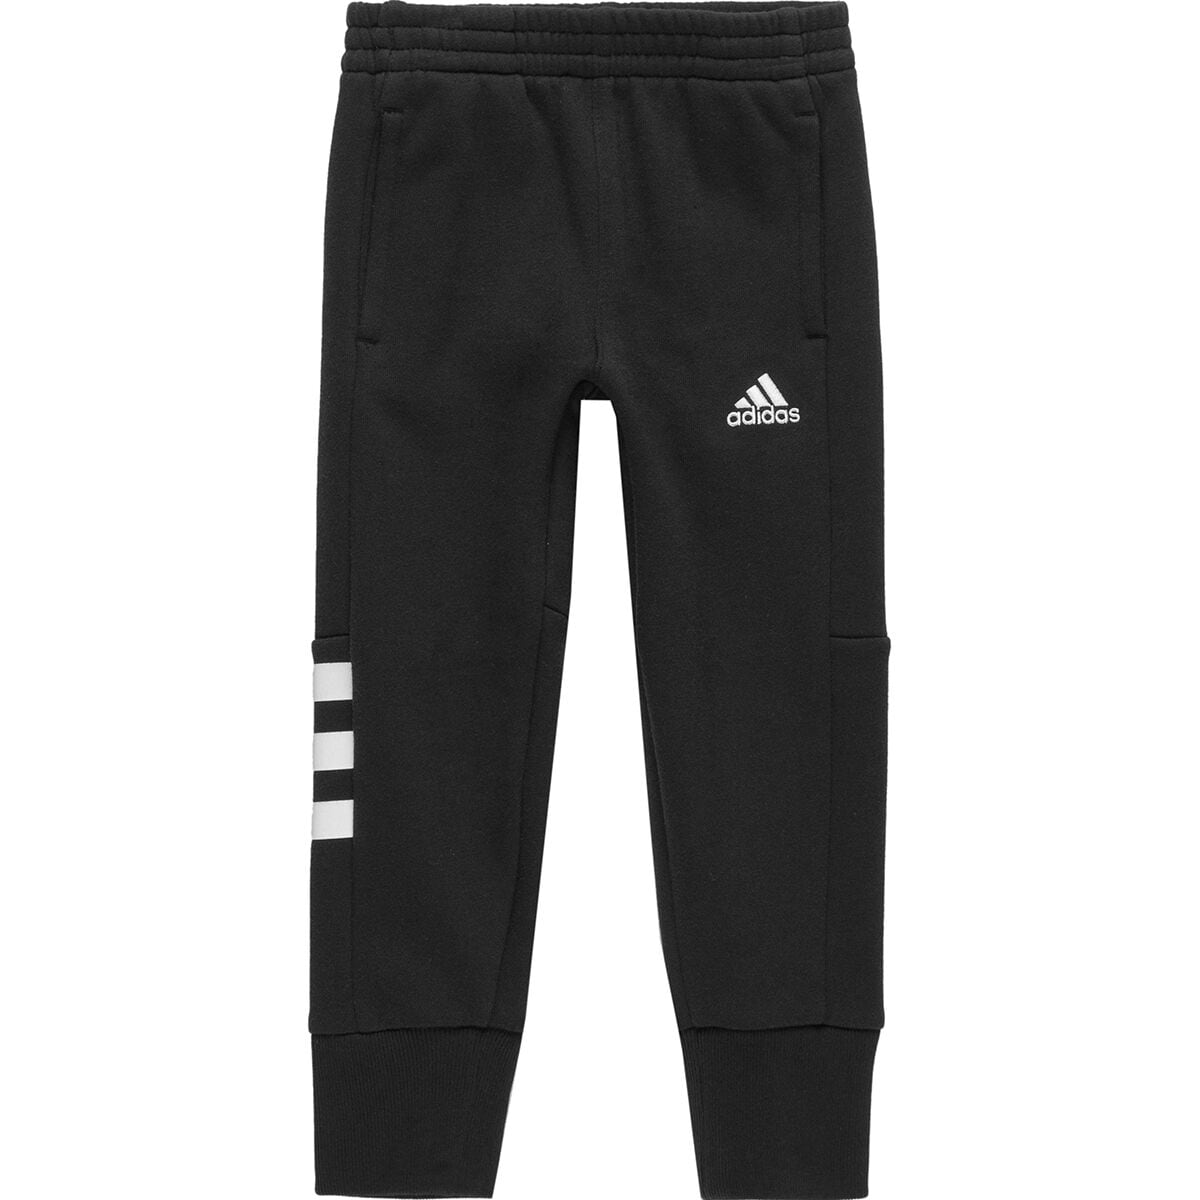 Adidas Iconic Tricot Jogger - Toddler Boys'